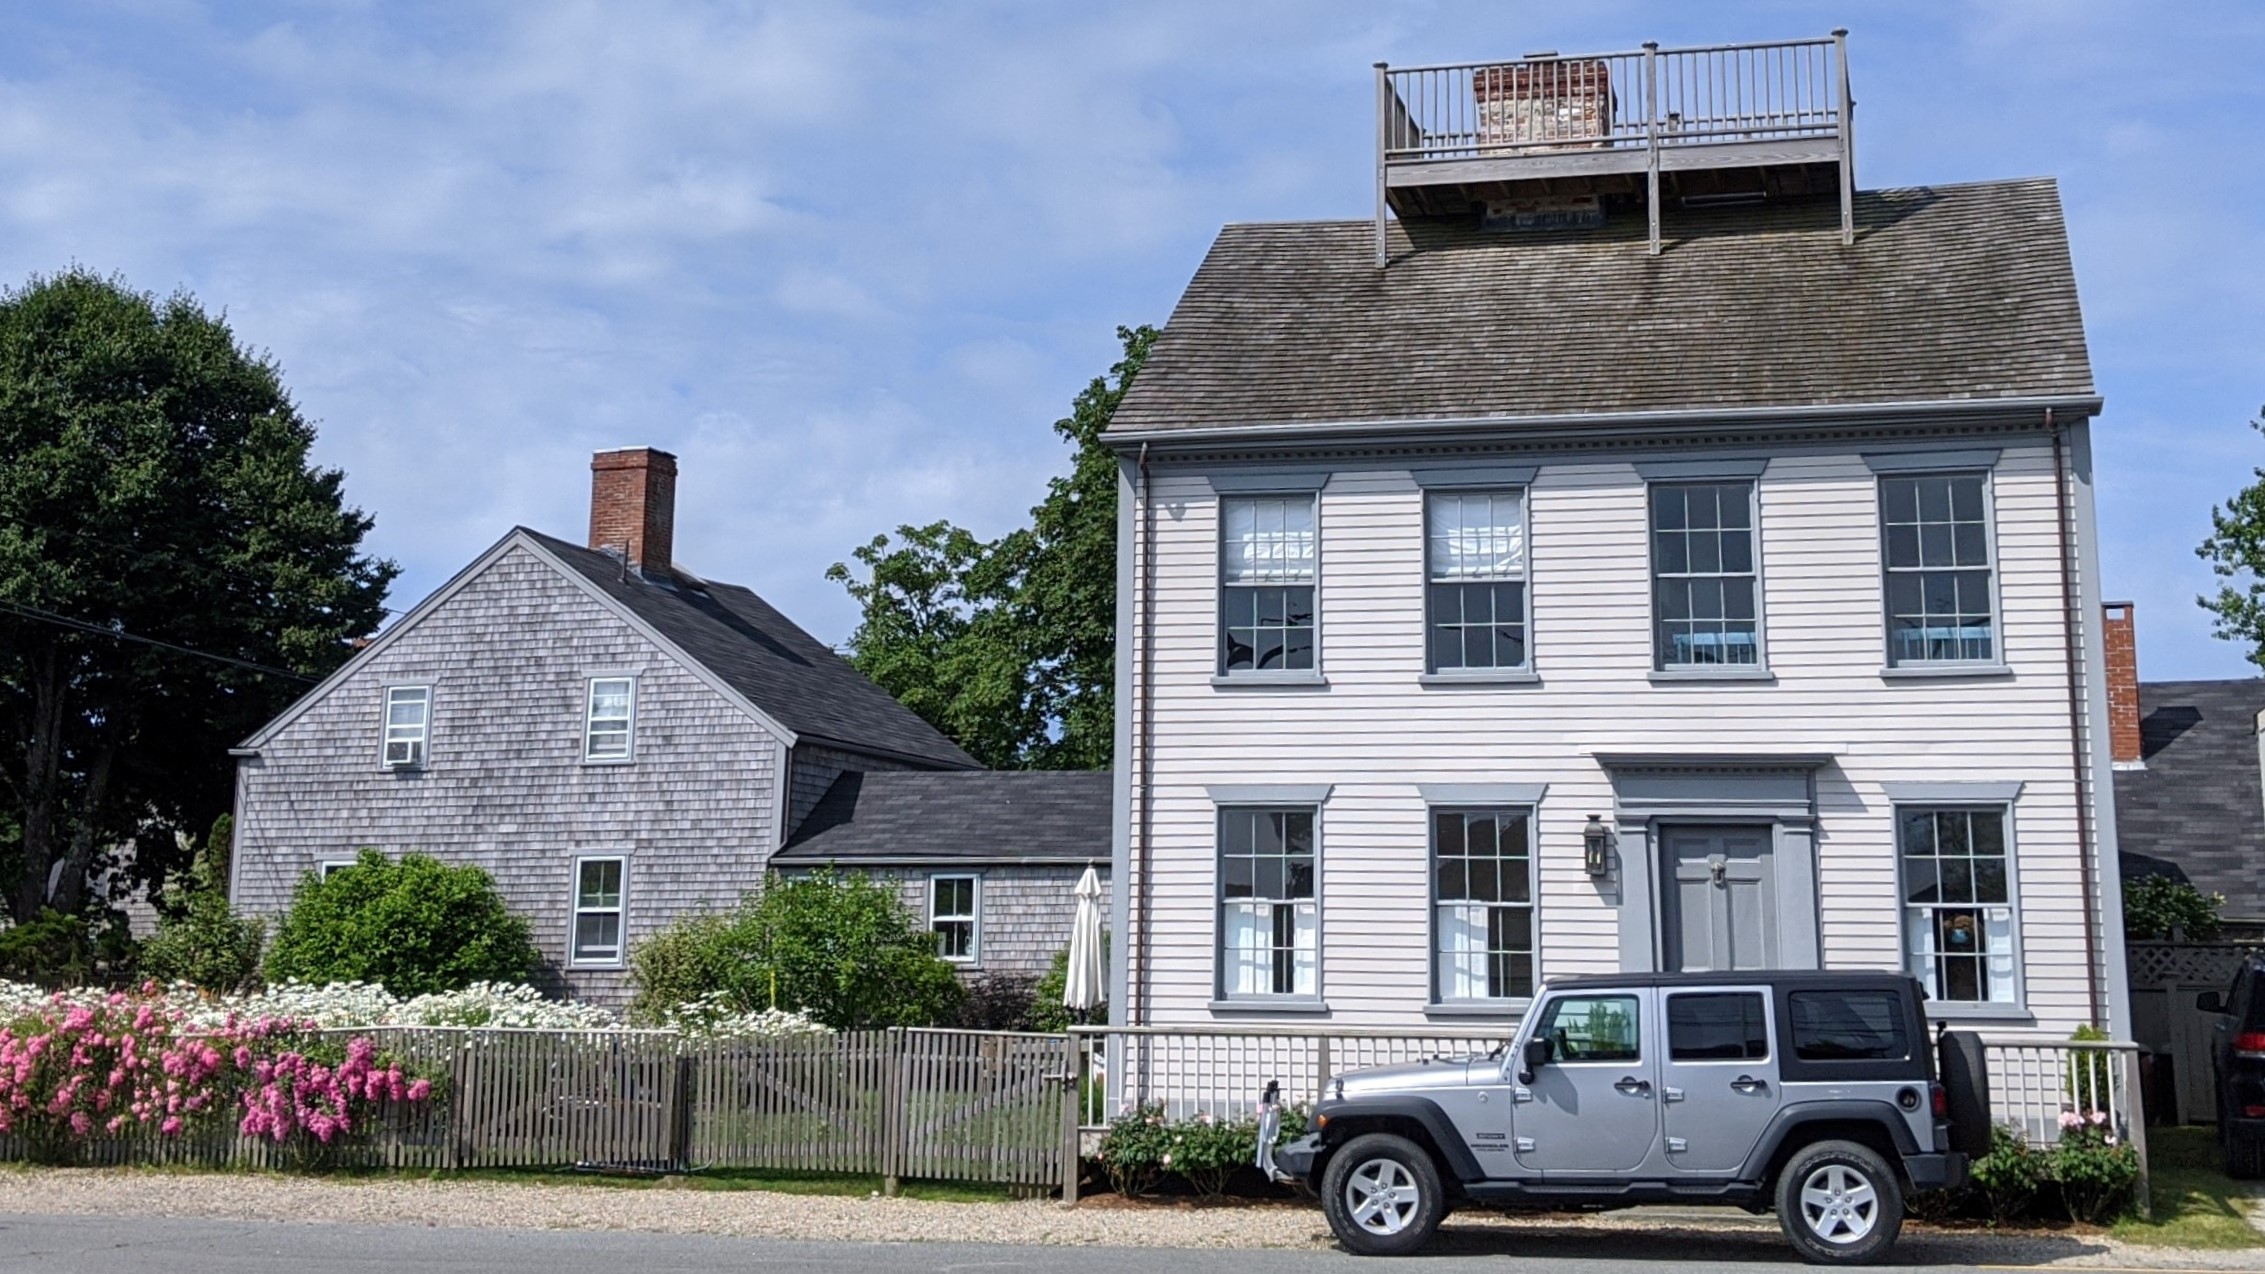 New Preservation Easement Recorded on 55 Union Street